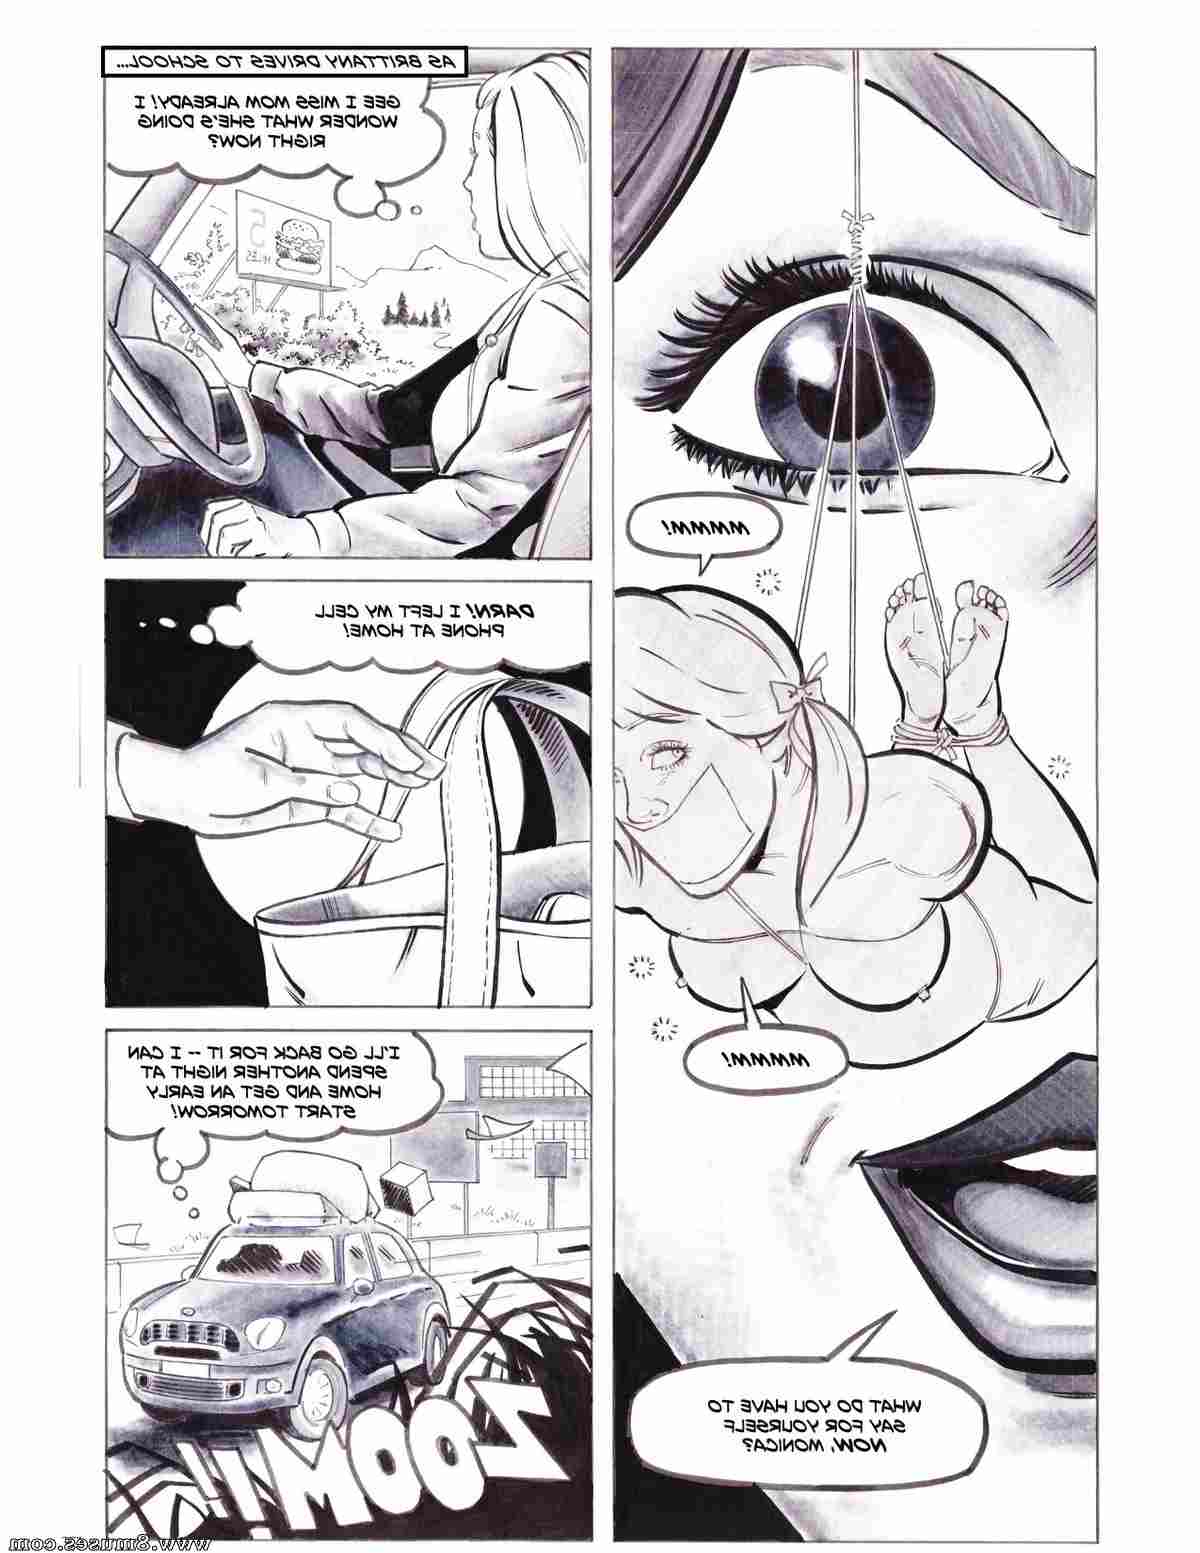 DreamTales-Comics/College-Bound College_Bound__8muses_-_Sex_and_Porn_Comics_14.jpg